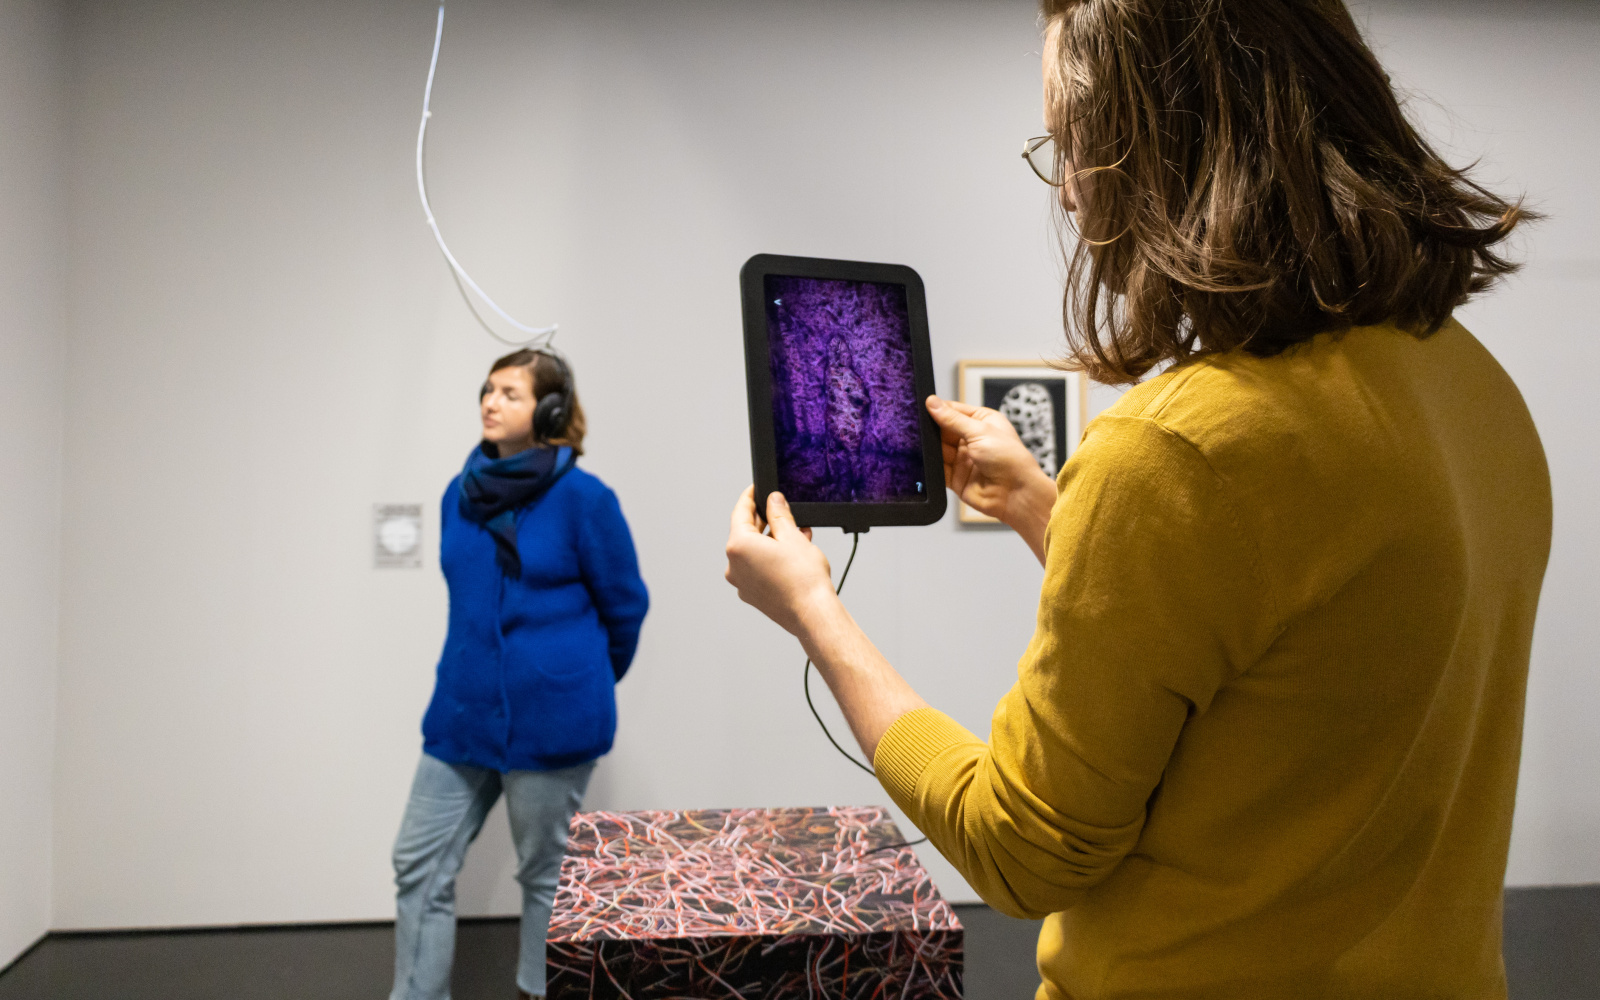 to see are two women. One is standing in the background and is photographed by the one in front through a tablet.